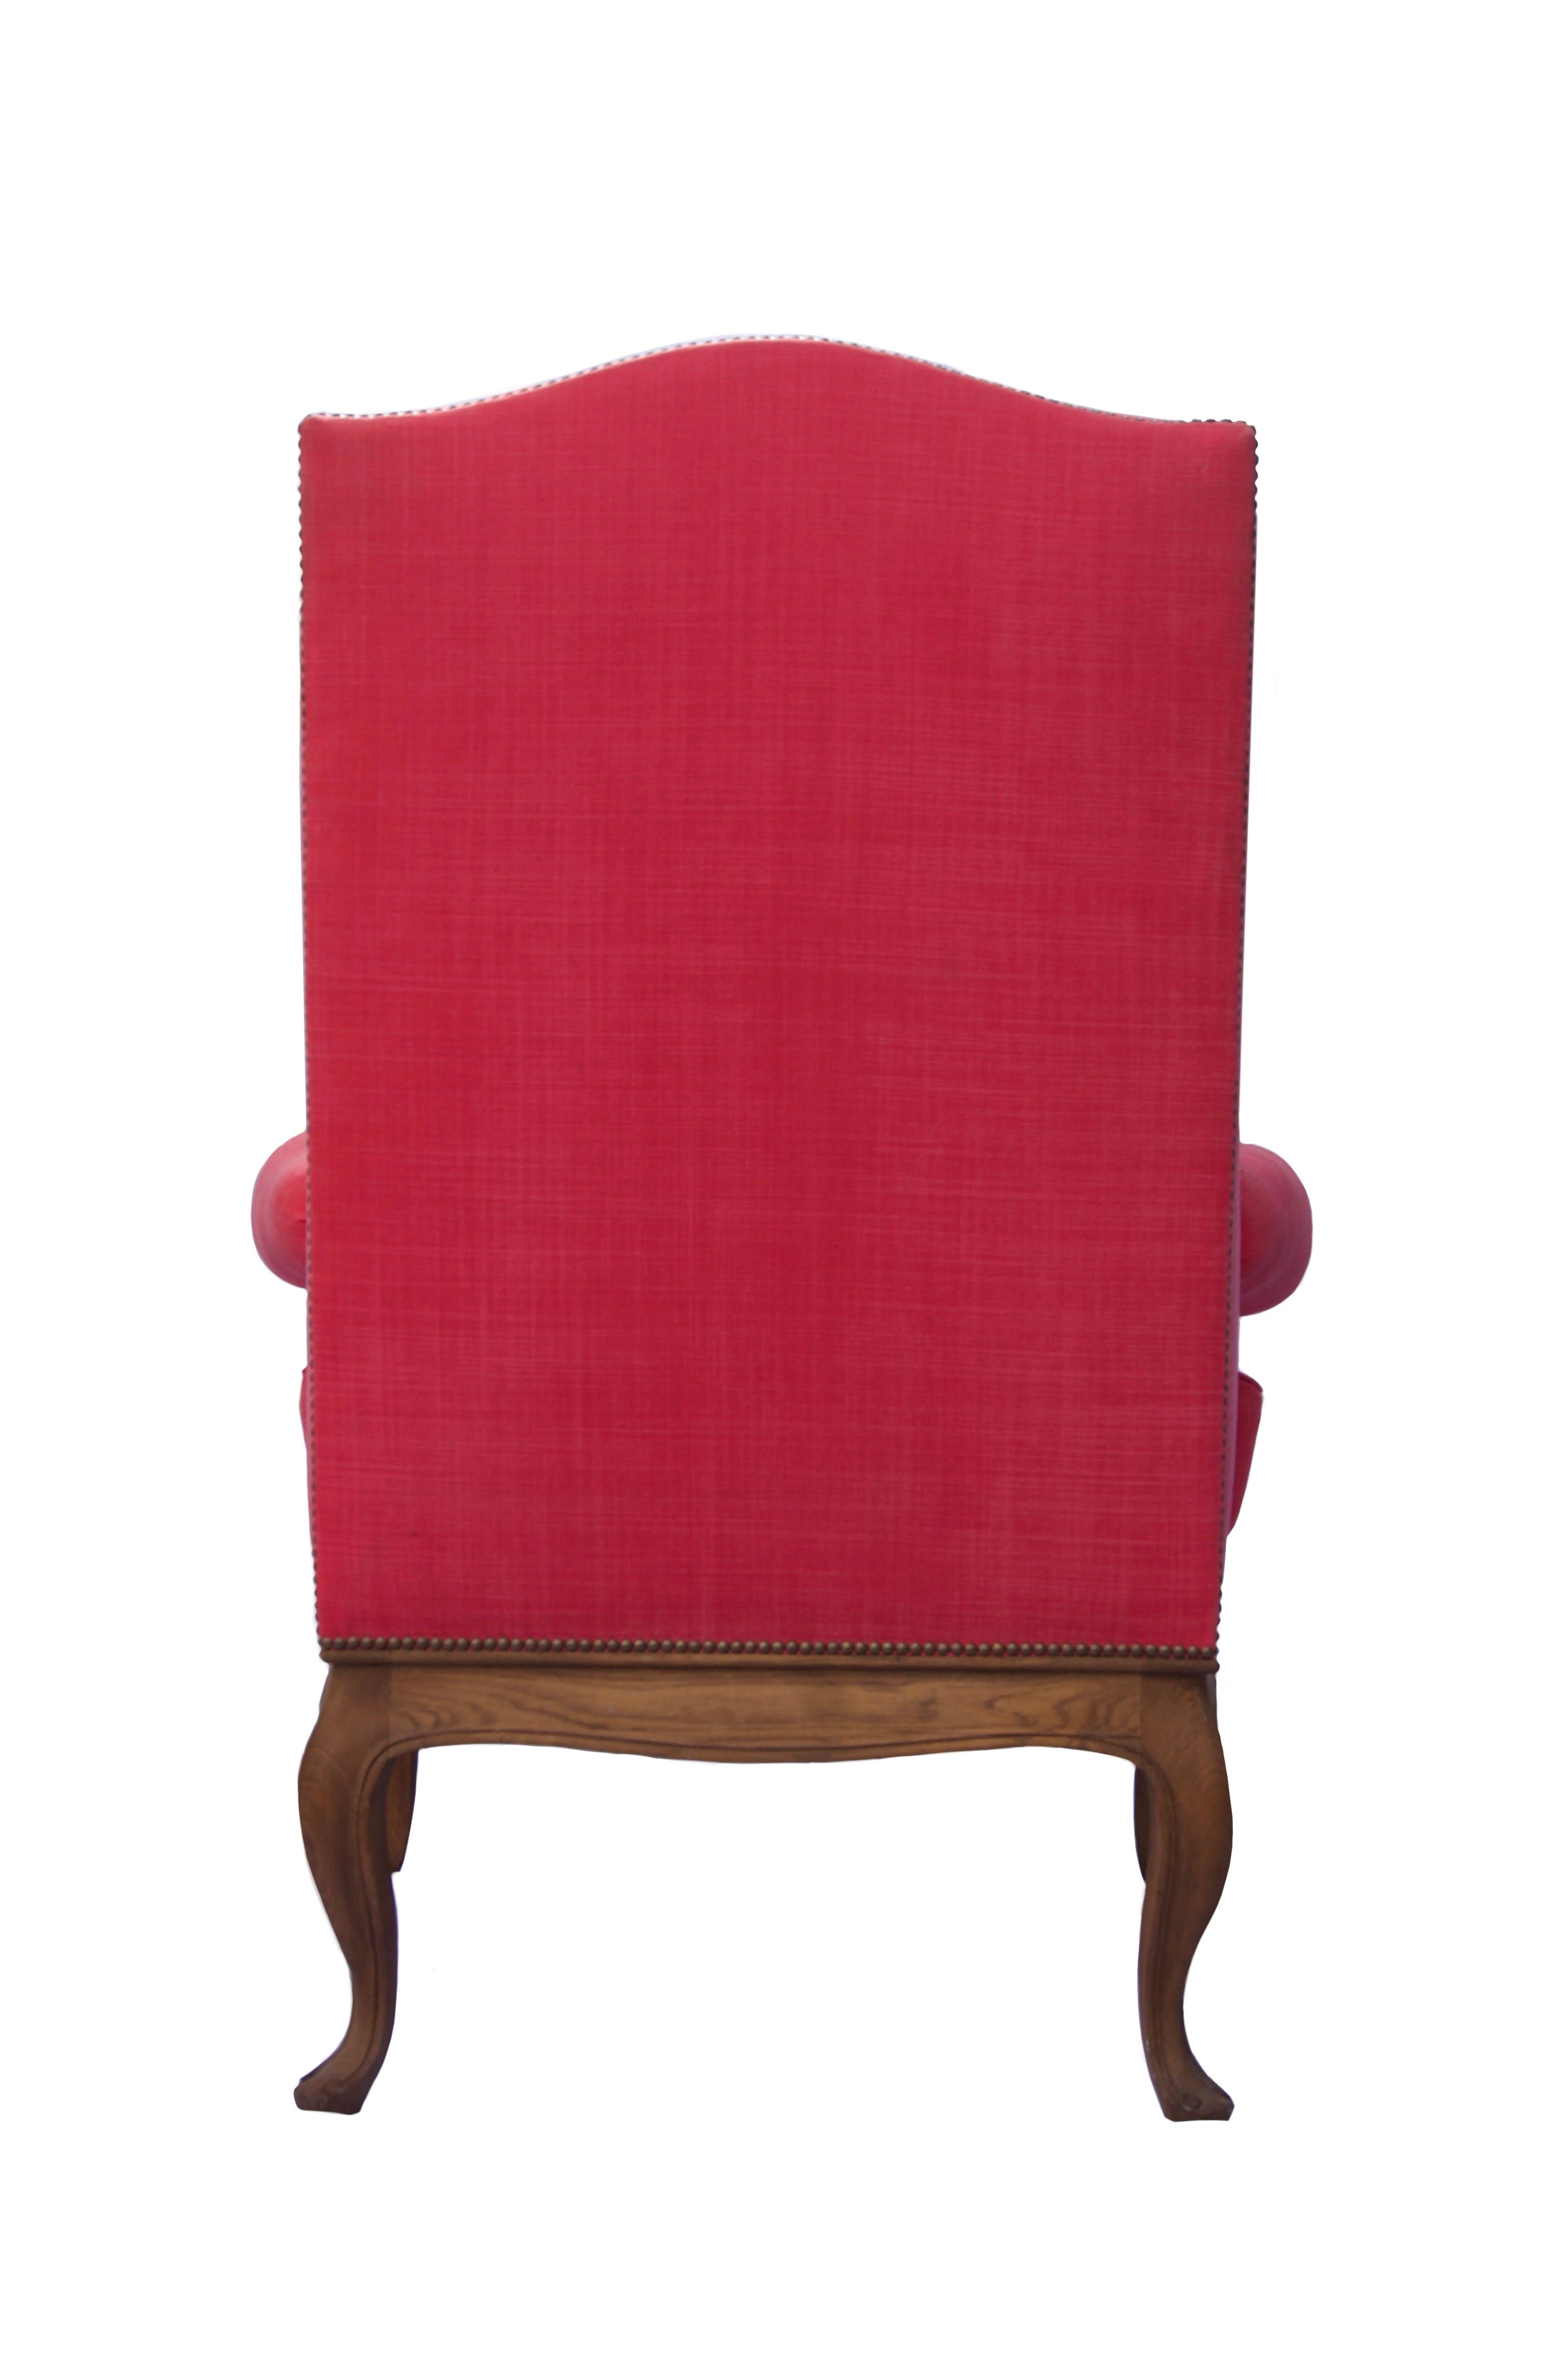 A French style oak wing chair covered in pink linen fabric with natural oak legs.